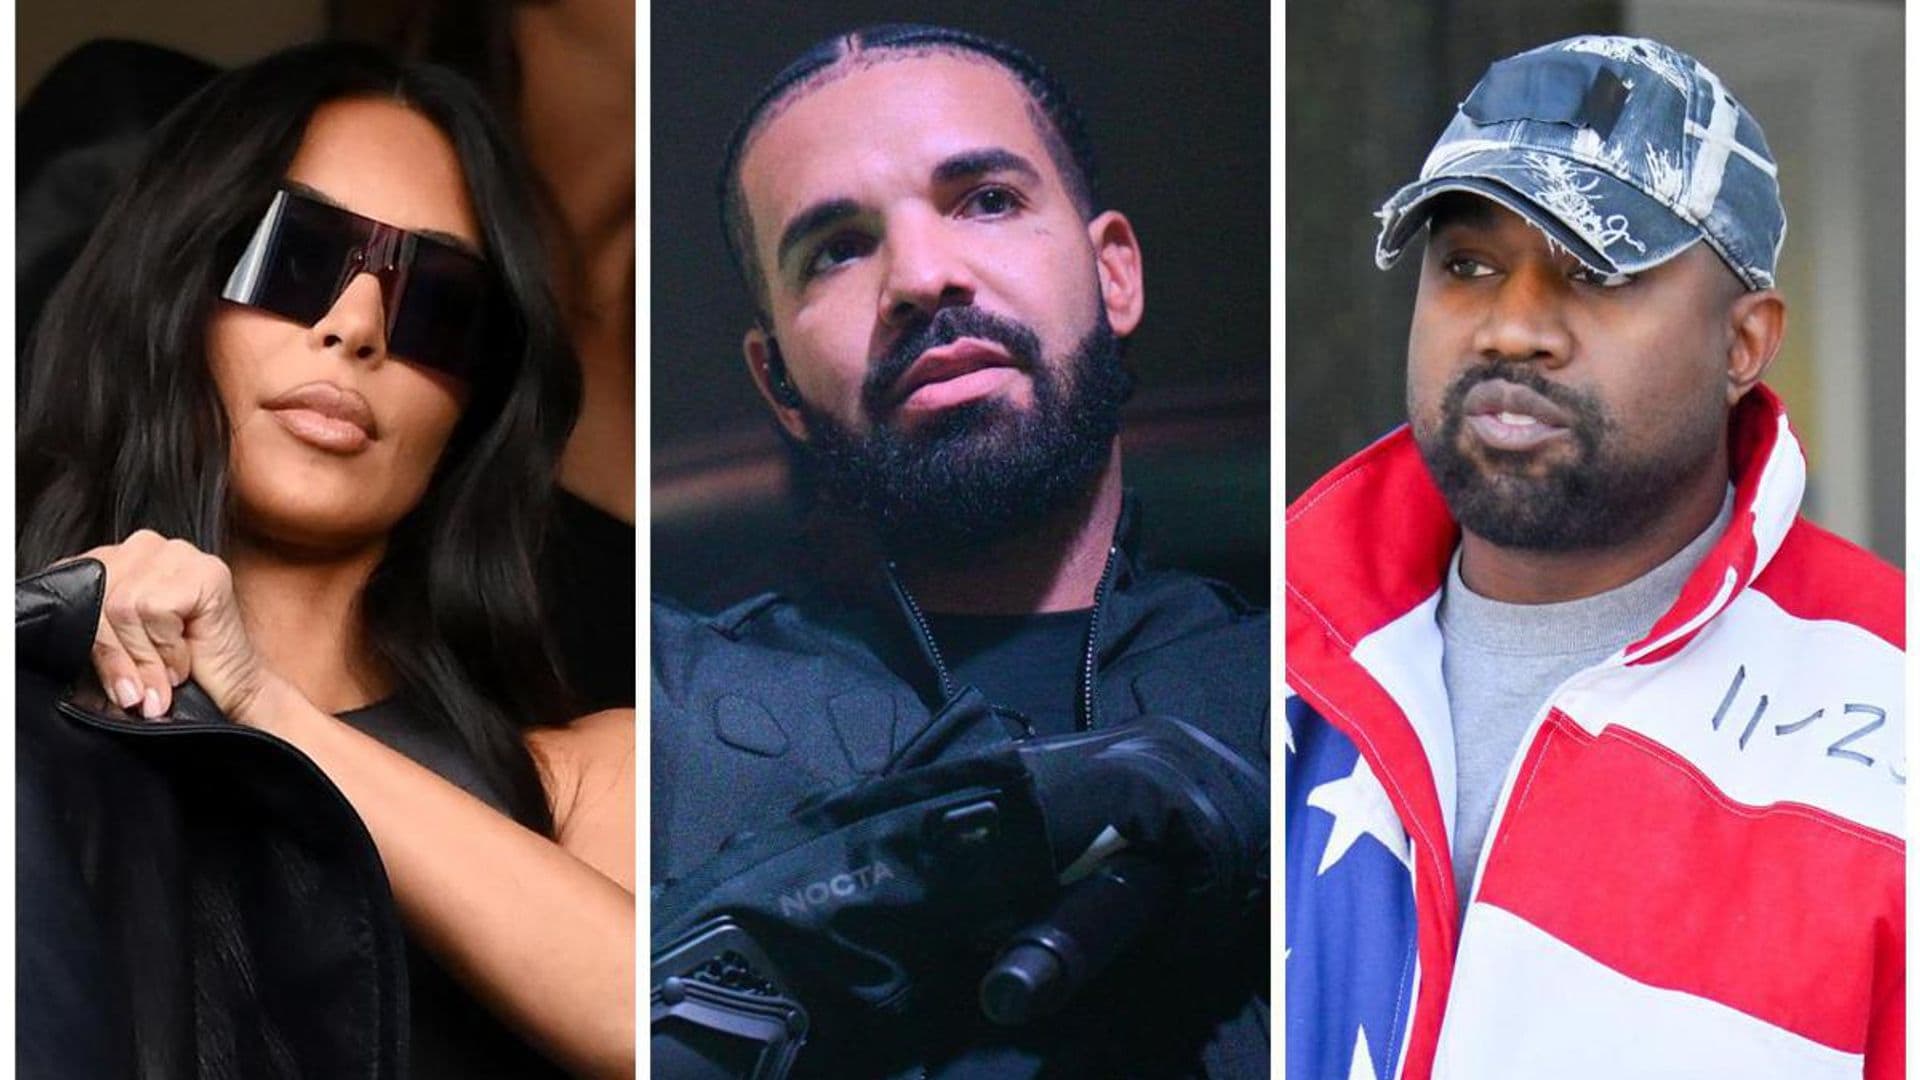 Is Drake confessing his love for Kim Kardashian in ‘Search and Rescue?’ Listen to the song here